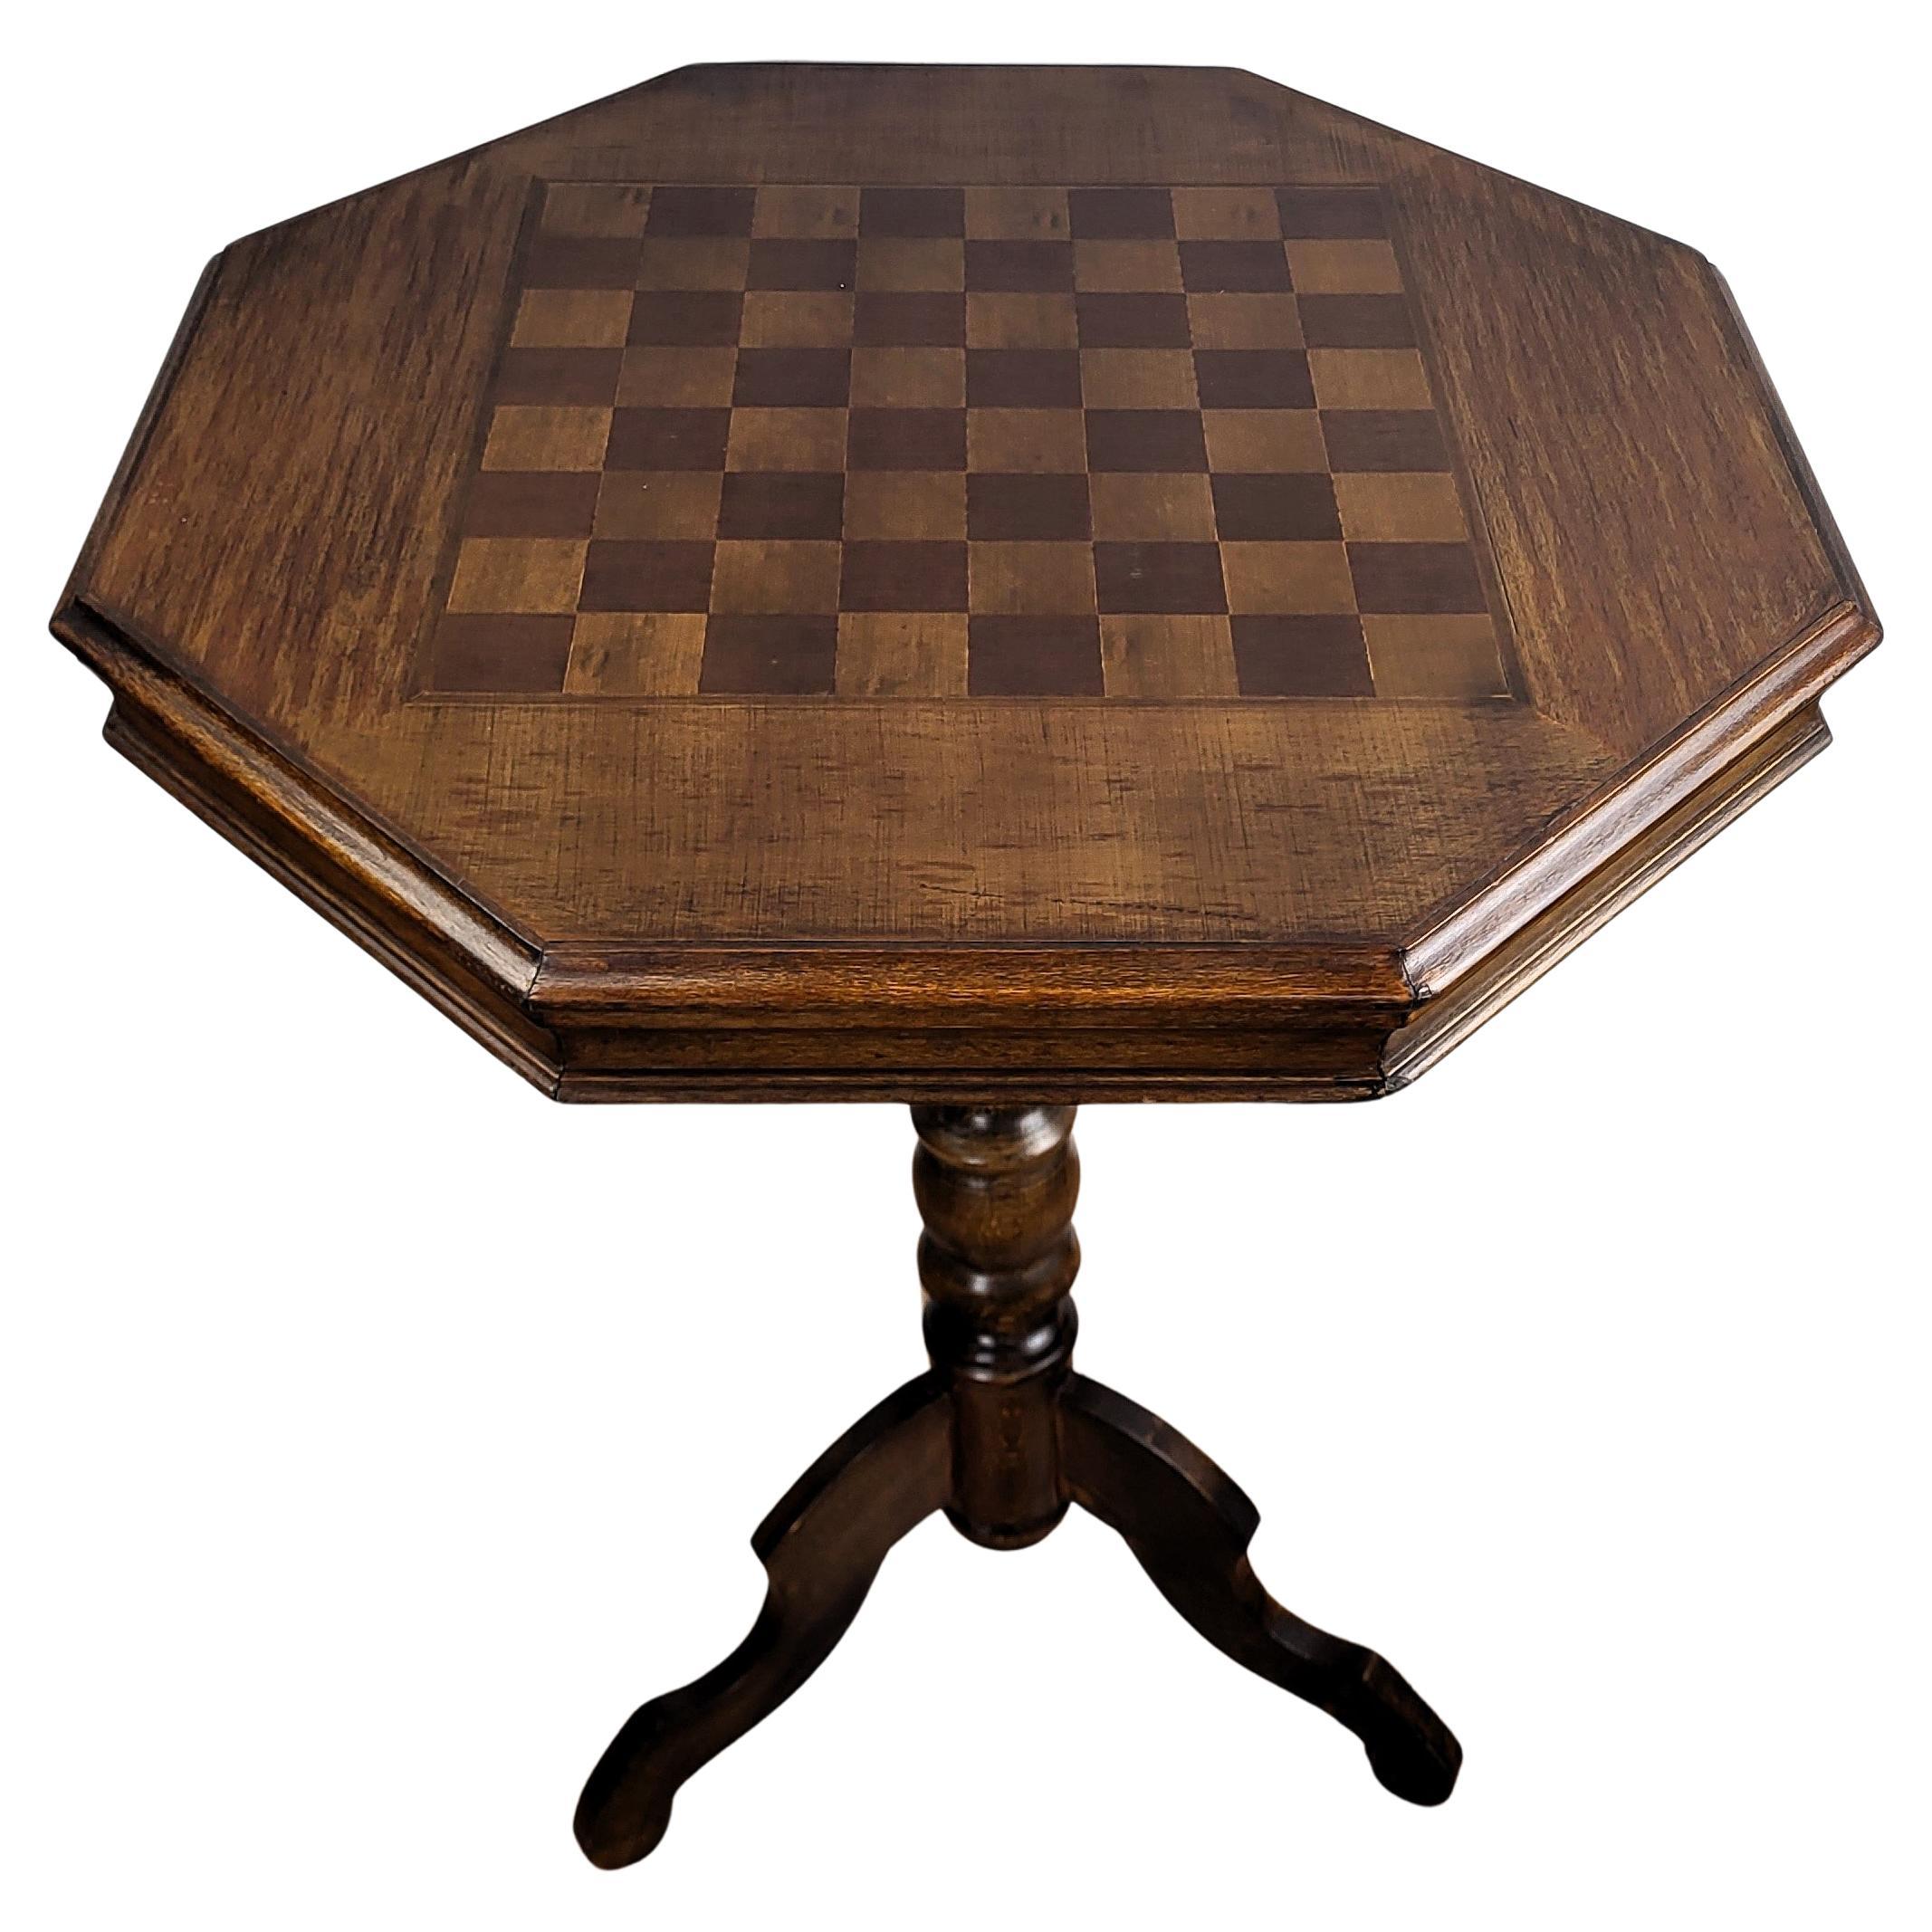 Neoclassical Italian Walnut Inlay Octagonal Tripod Chess Games or Side Table